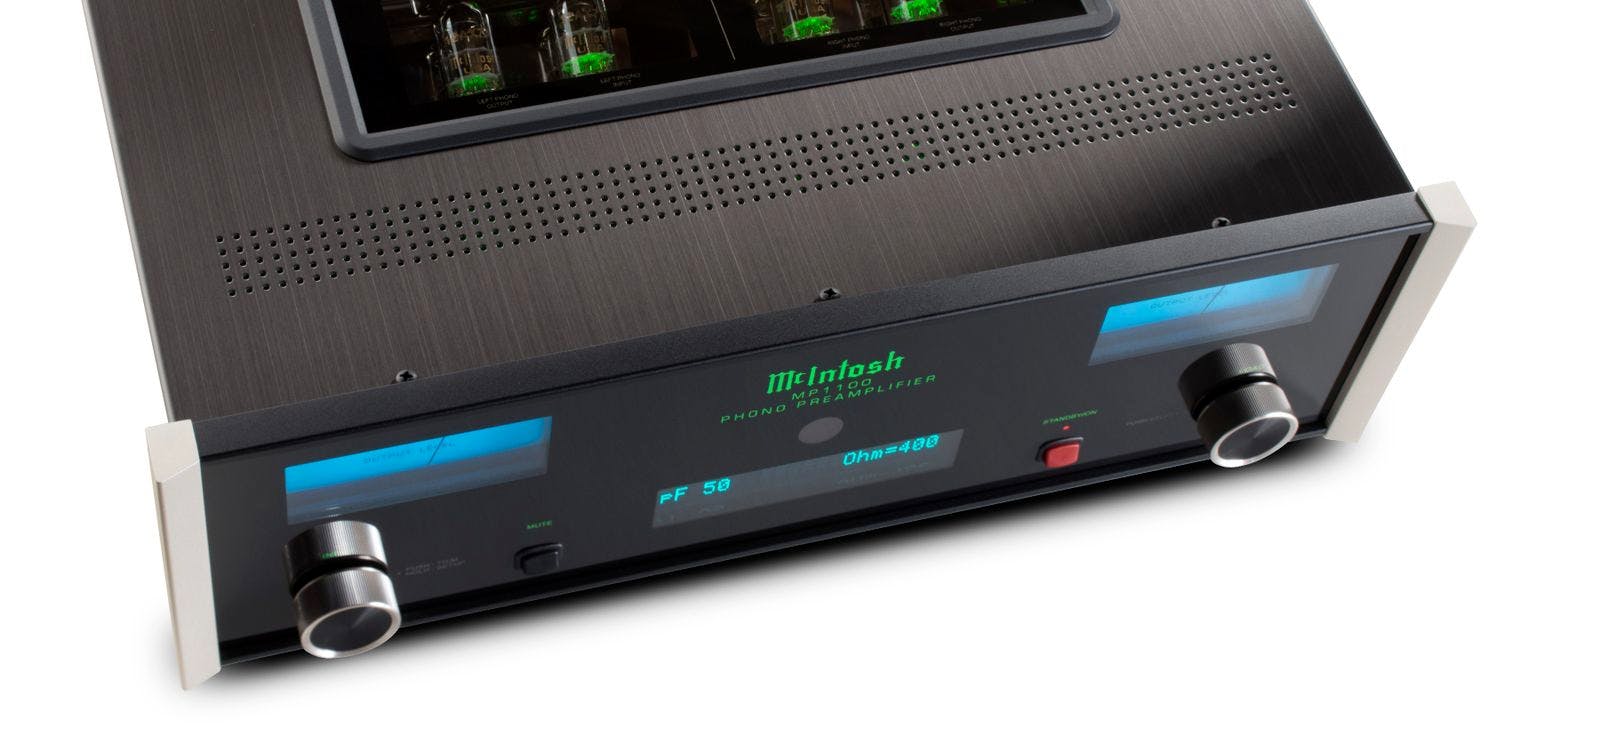 The McIntosh MP1100 Vacuum Tube Phono Preamplifier has been discontinued